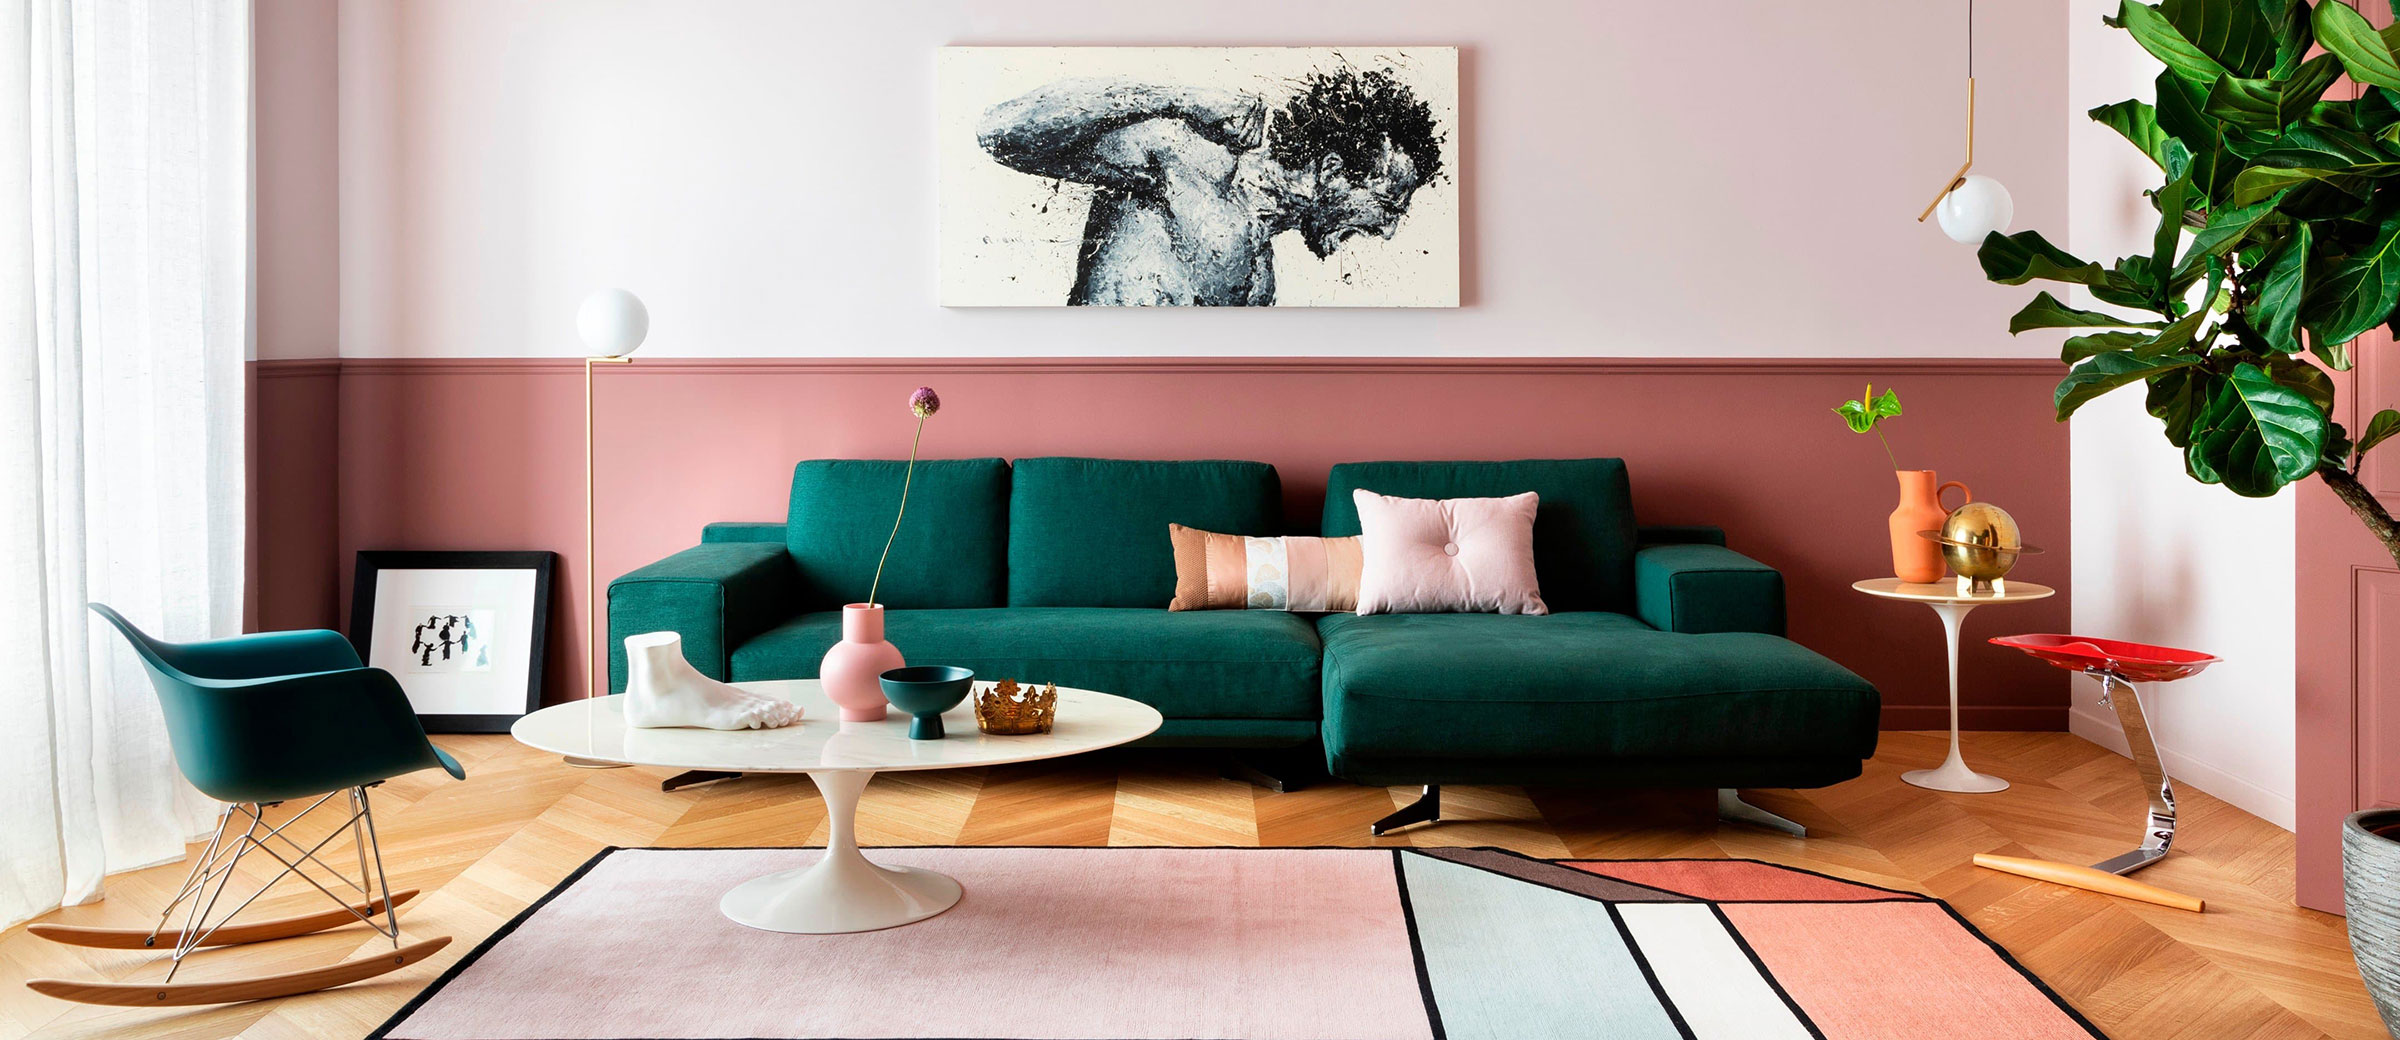 Living room with green sofa and pink walls and large wall art